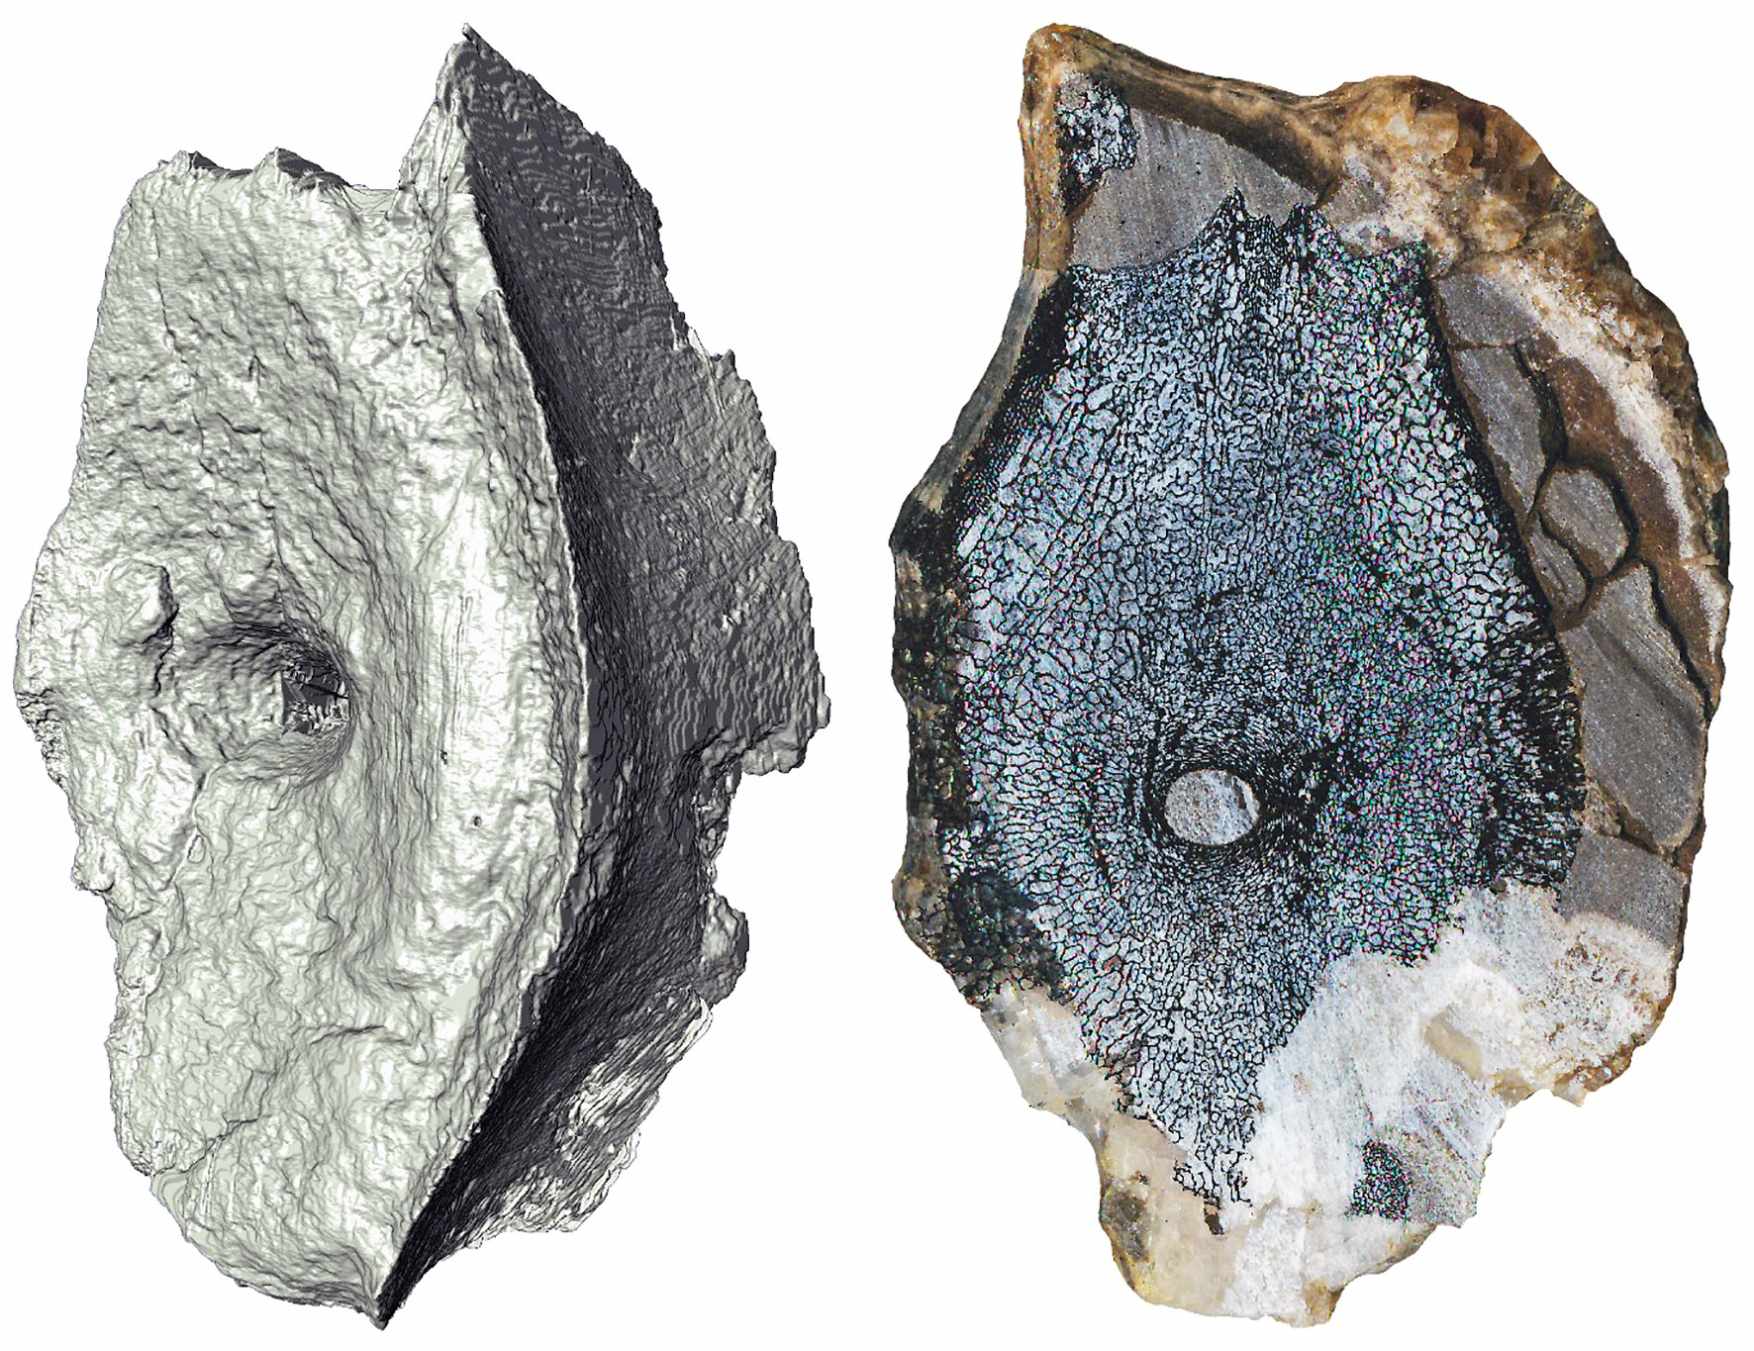 A computed tomography image (left) and cross-section showing the internal bone structure of the ichthyosaur vertebrae, which is spongy, like that of a modern whale.